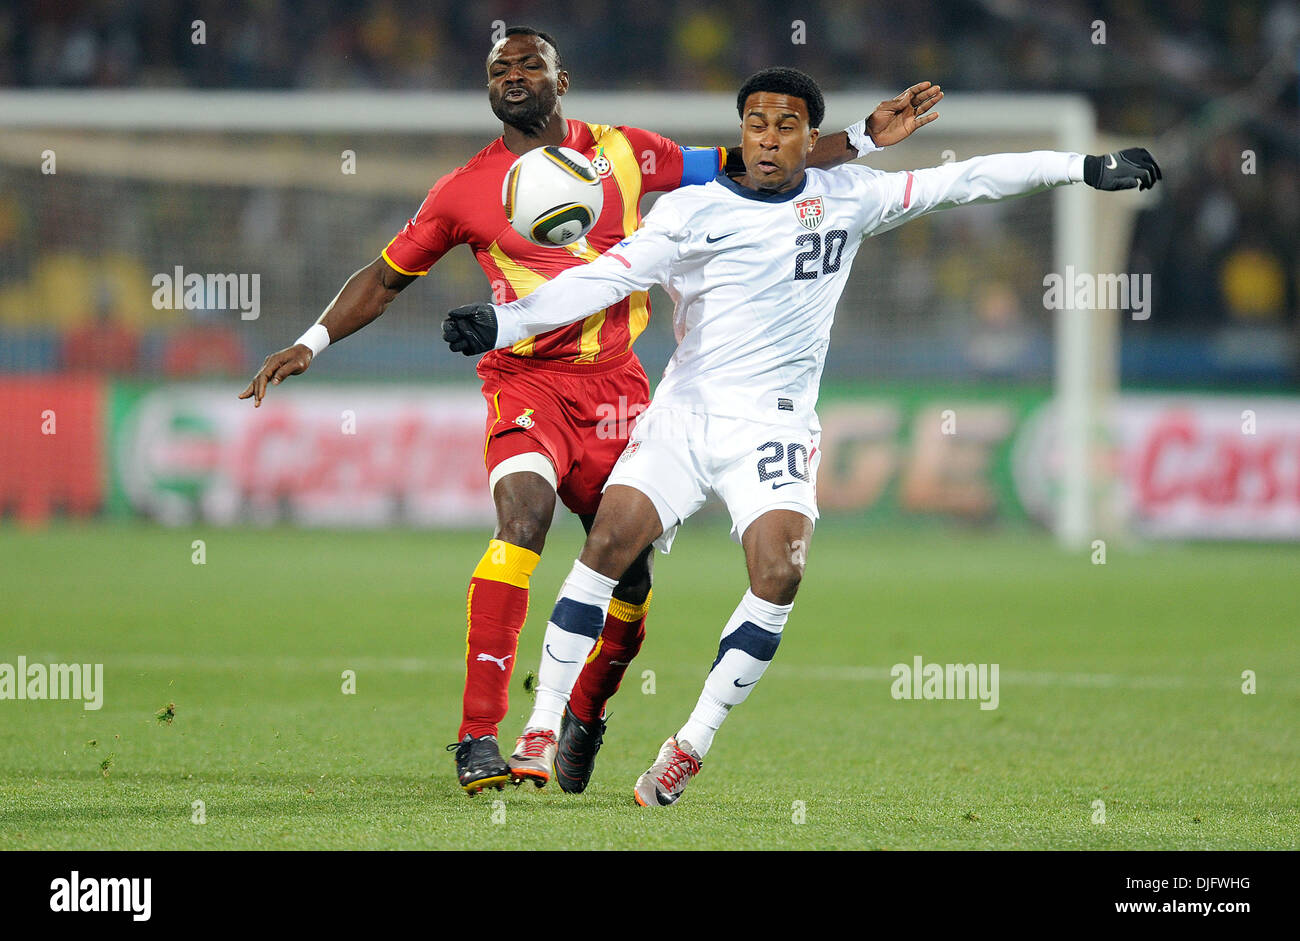 June 26, 2010 - Rustenburg, South Africa - Robbie Findley of USA fights for the ball with John Mensah of Ghana during the 2010 FIFA World Cup soccer match between USA and Ghana at Royal Bafokeng Stadium on June 26, 2010 in Rustenburg, South Africa. (Credit Image: © Luca Ghidoni/ZUMApress.com) Stock Photo